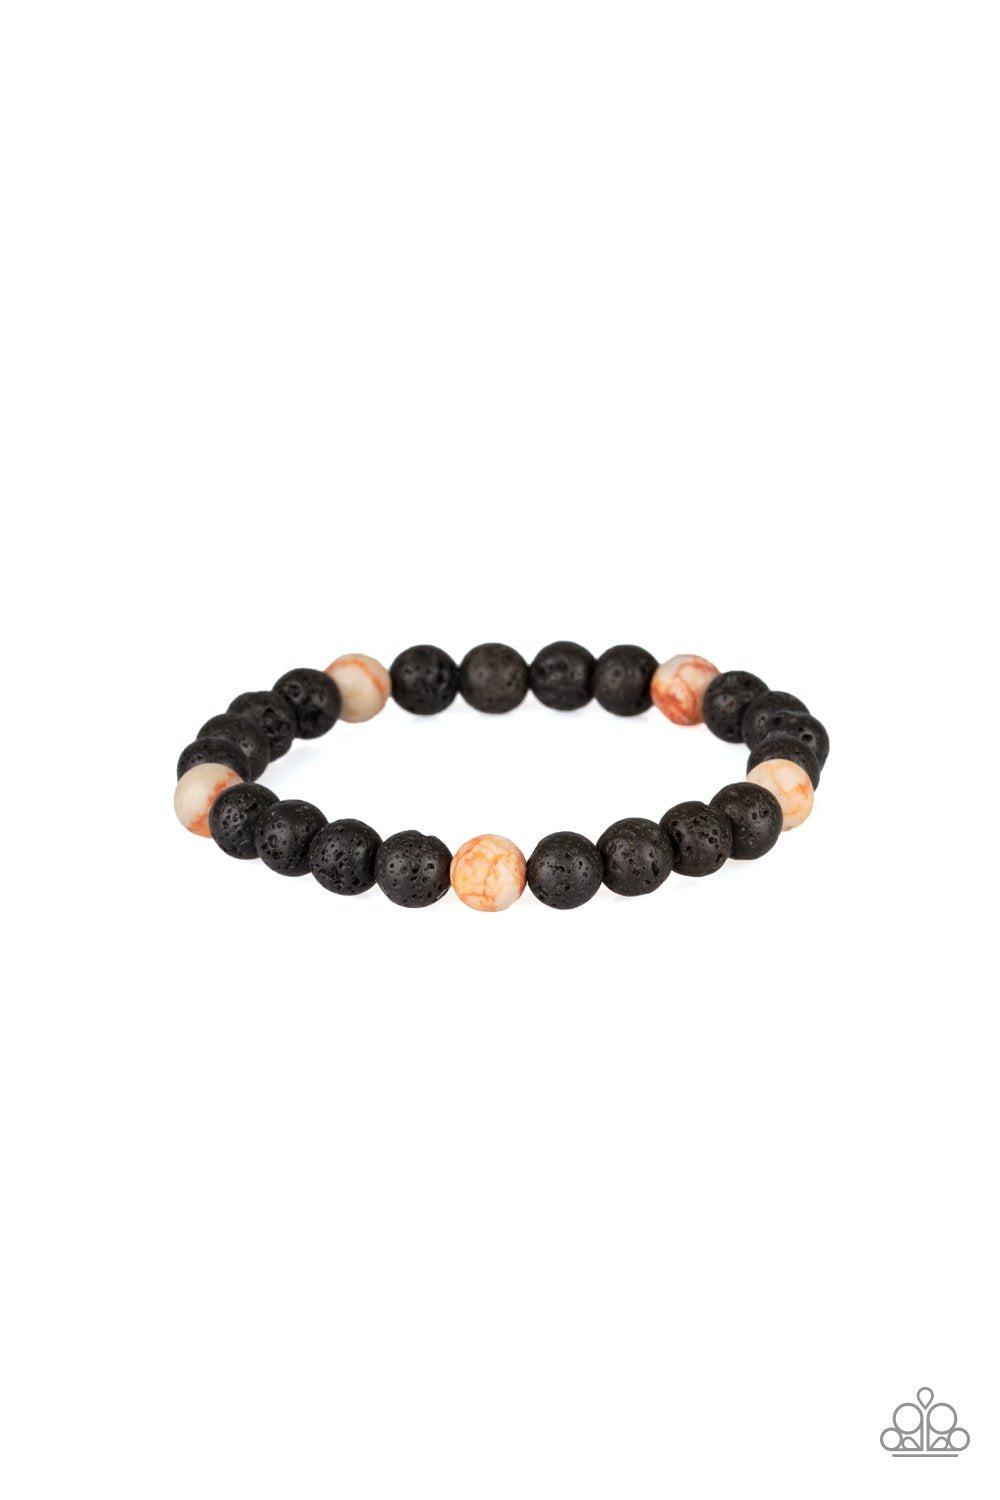 Enlivened Orange Stone and Lava Rock Bracelet - Paparazzi Accessories-CarasShop.com - $5 Jewelry by Cara Jewels